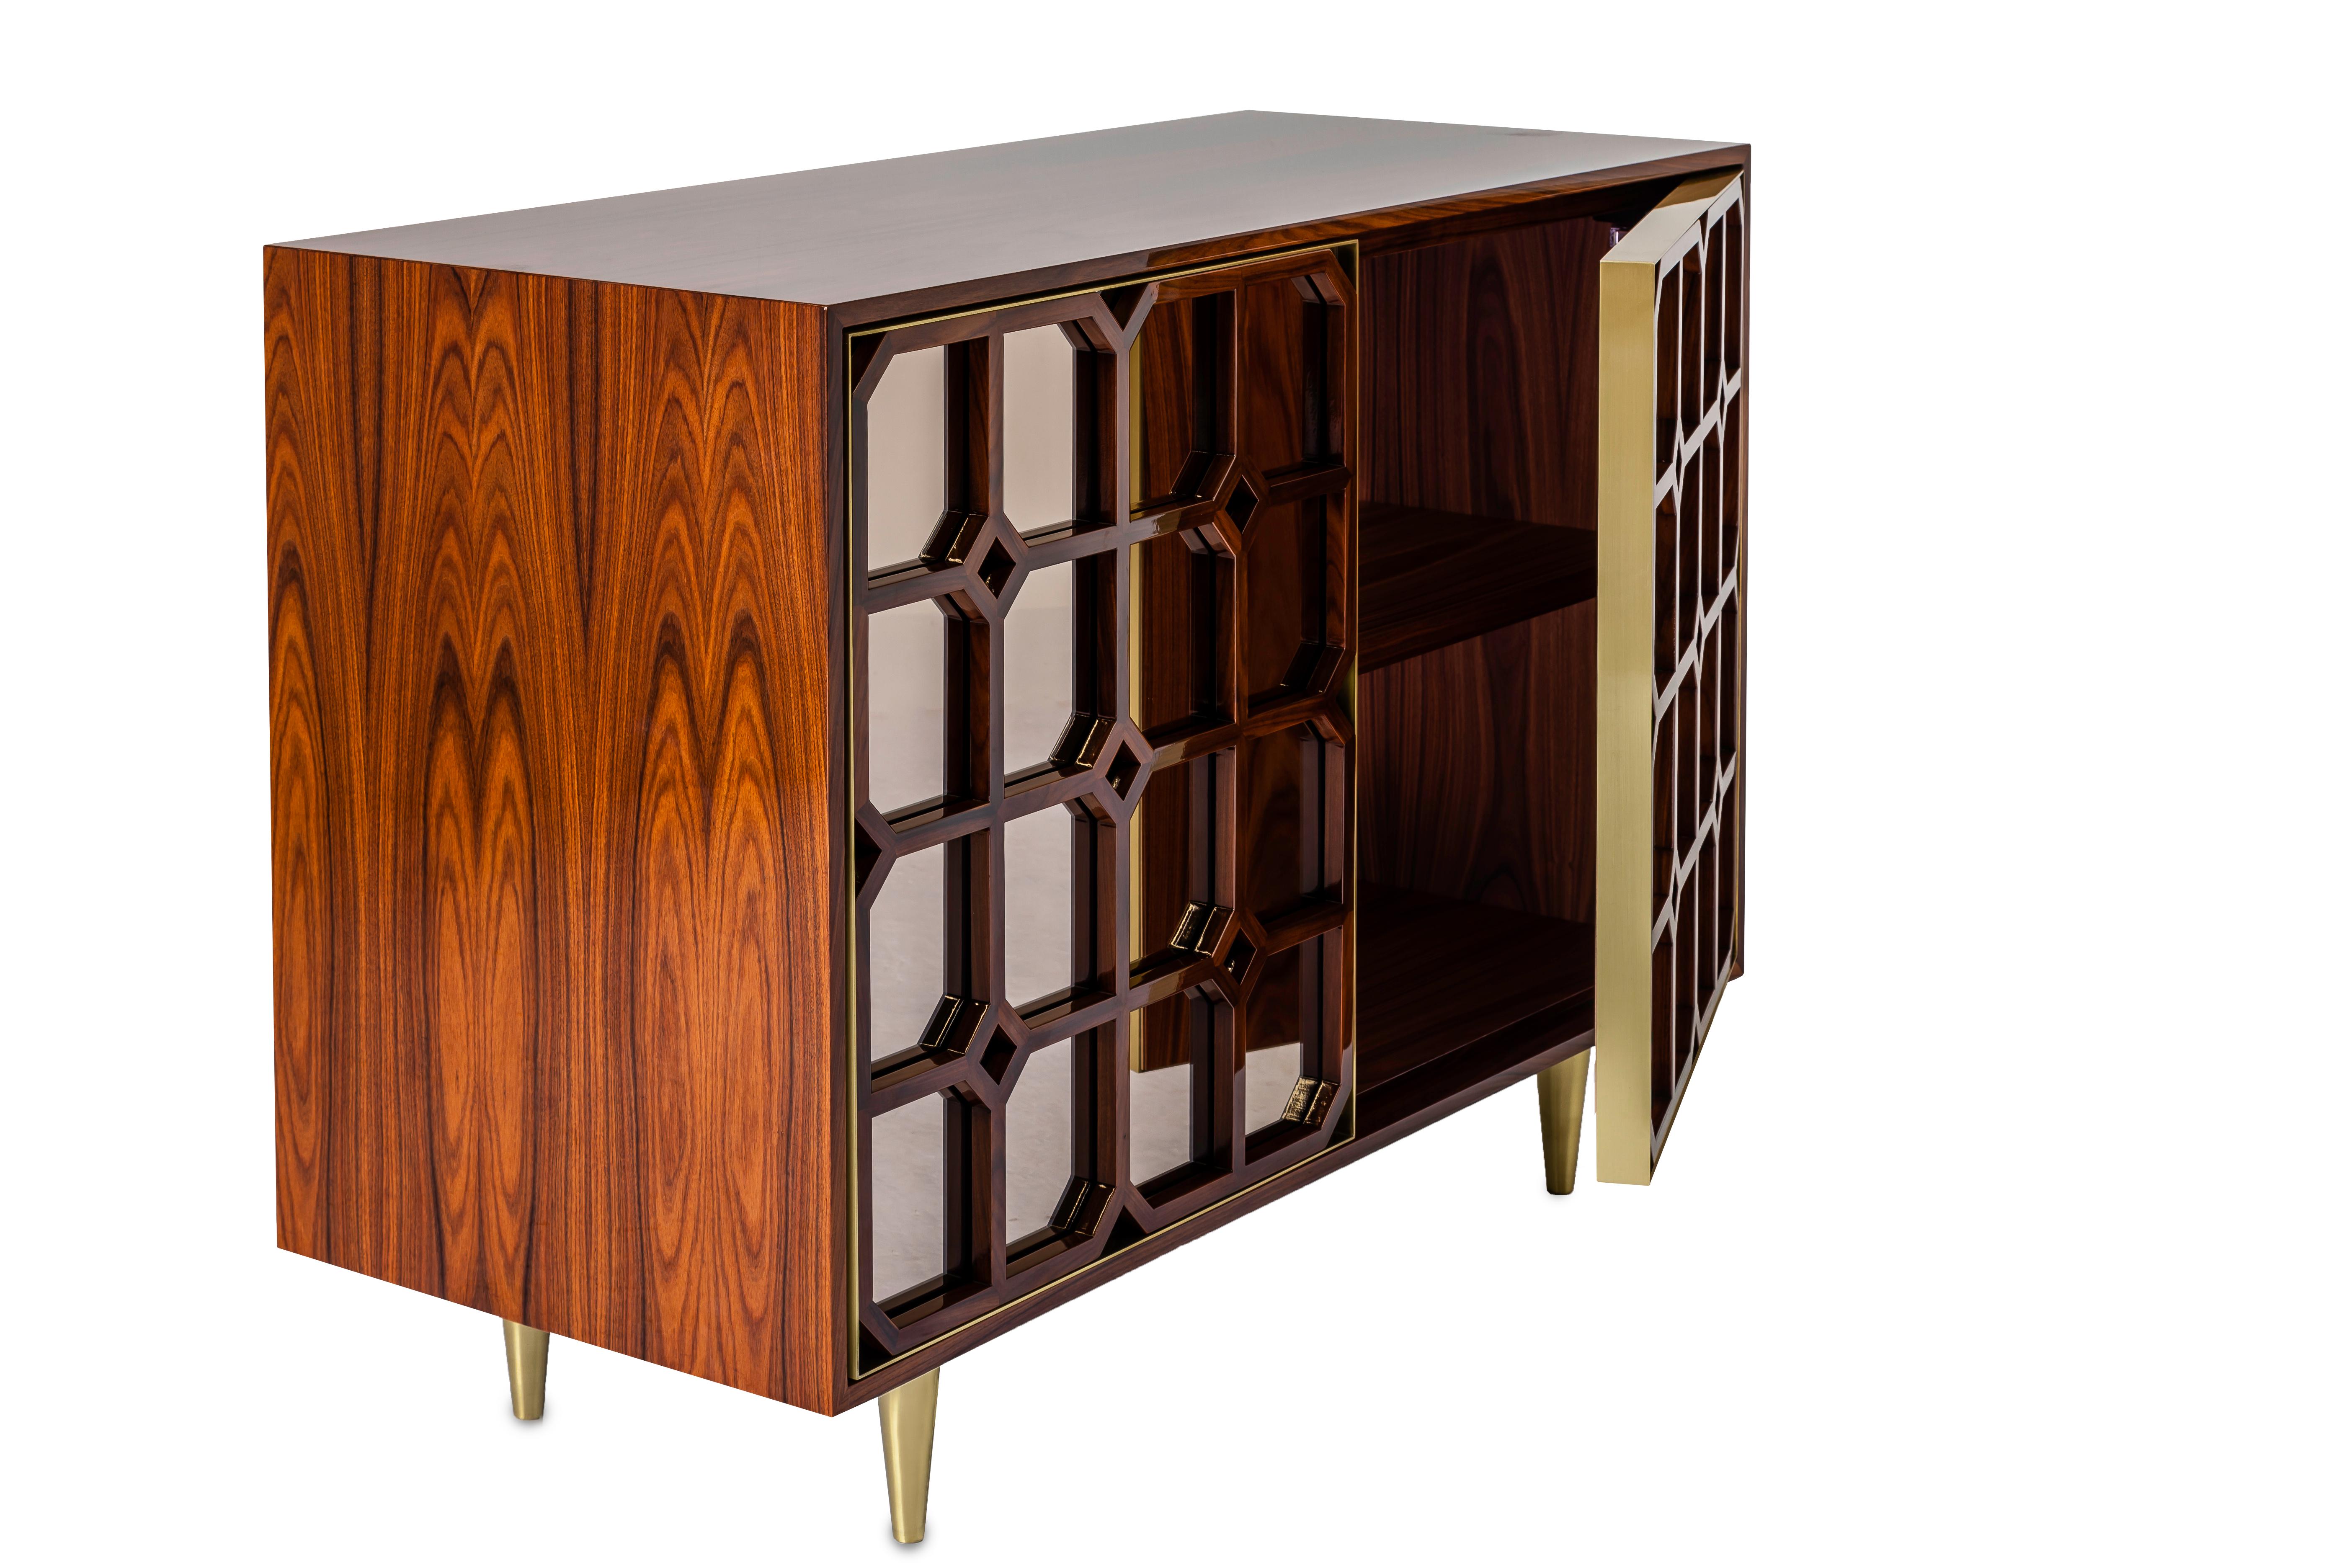 South American Nina Credenza Natural Wood Handmade Sophisticated Details 120 For Sale